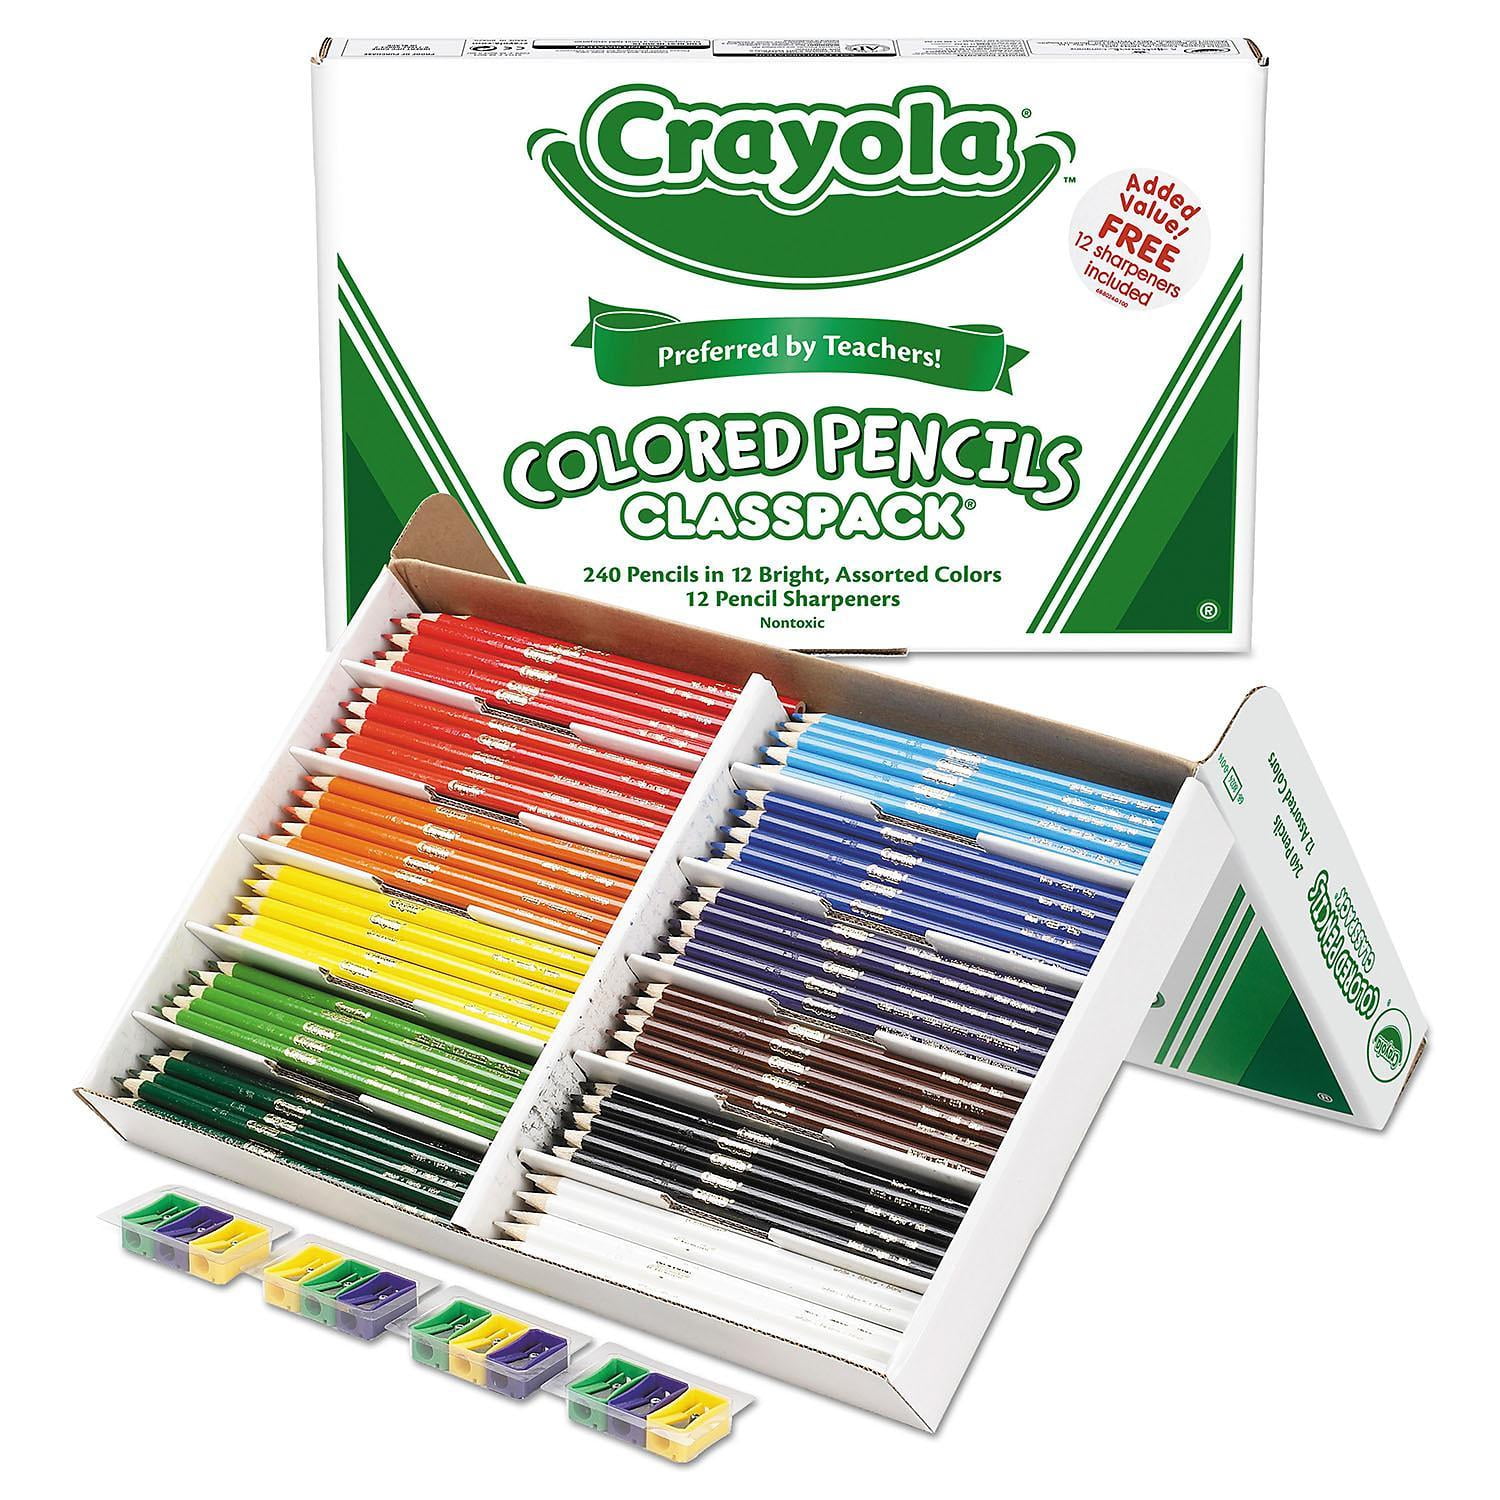 Crayola Colored Woodcase Pencil Classpack, 3.3mm, 20 EA of 12 Ast Colors +  12 Sharpeners